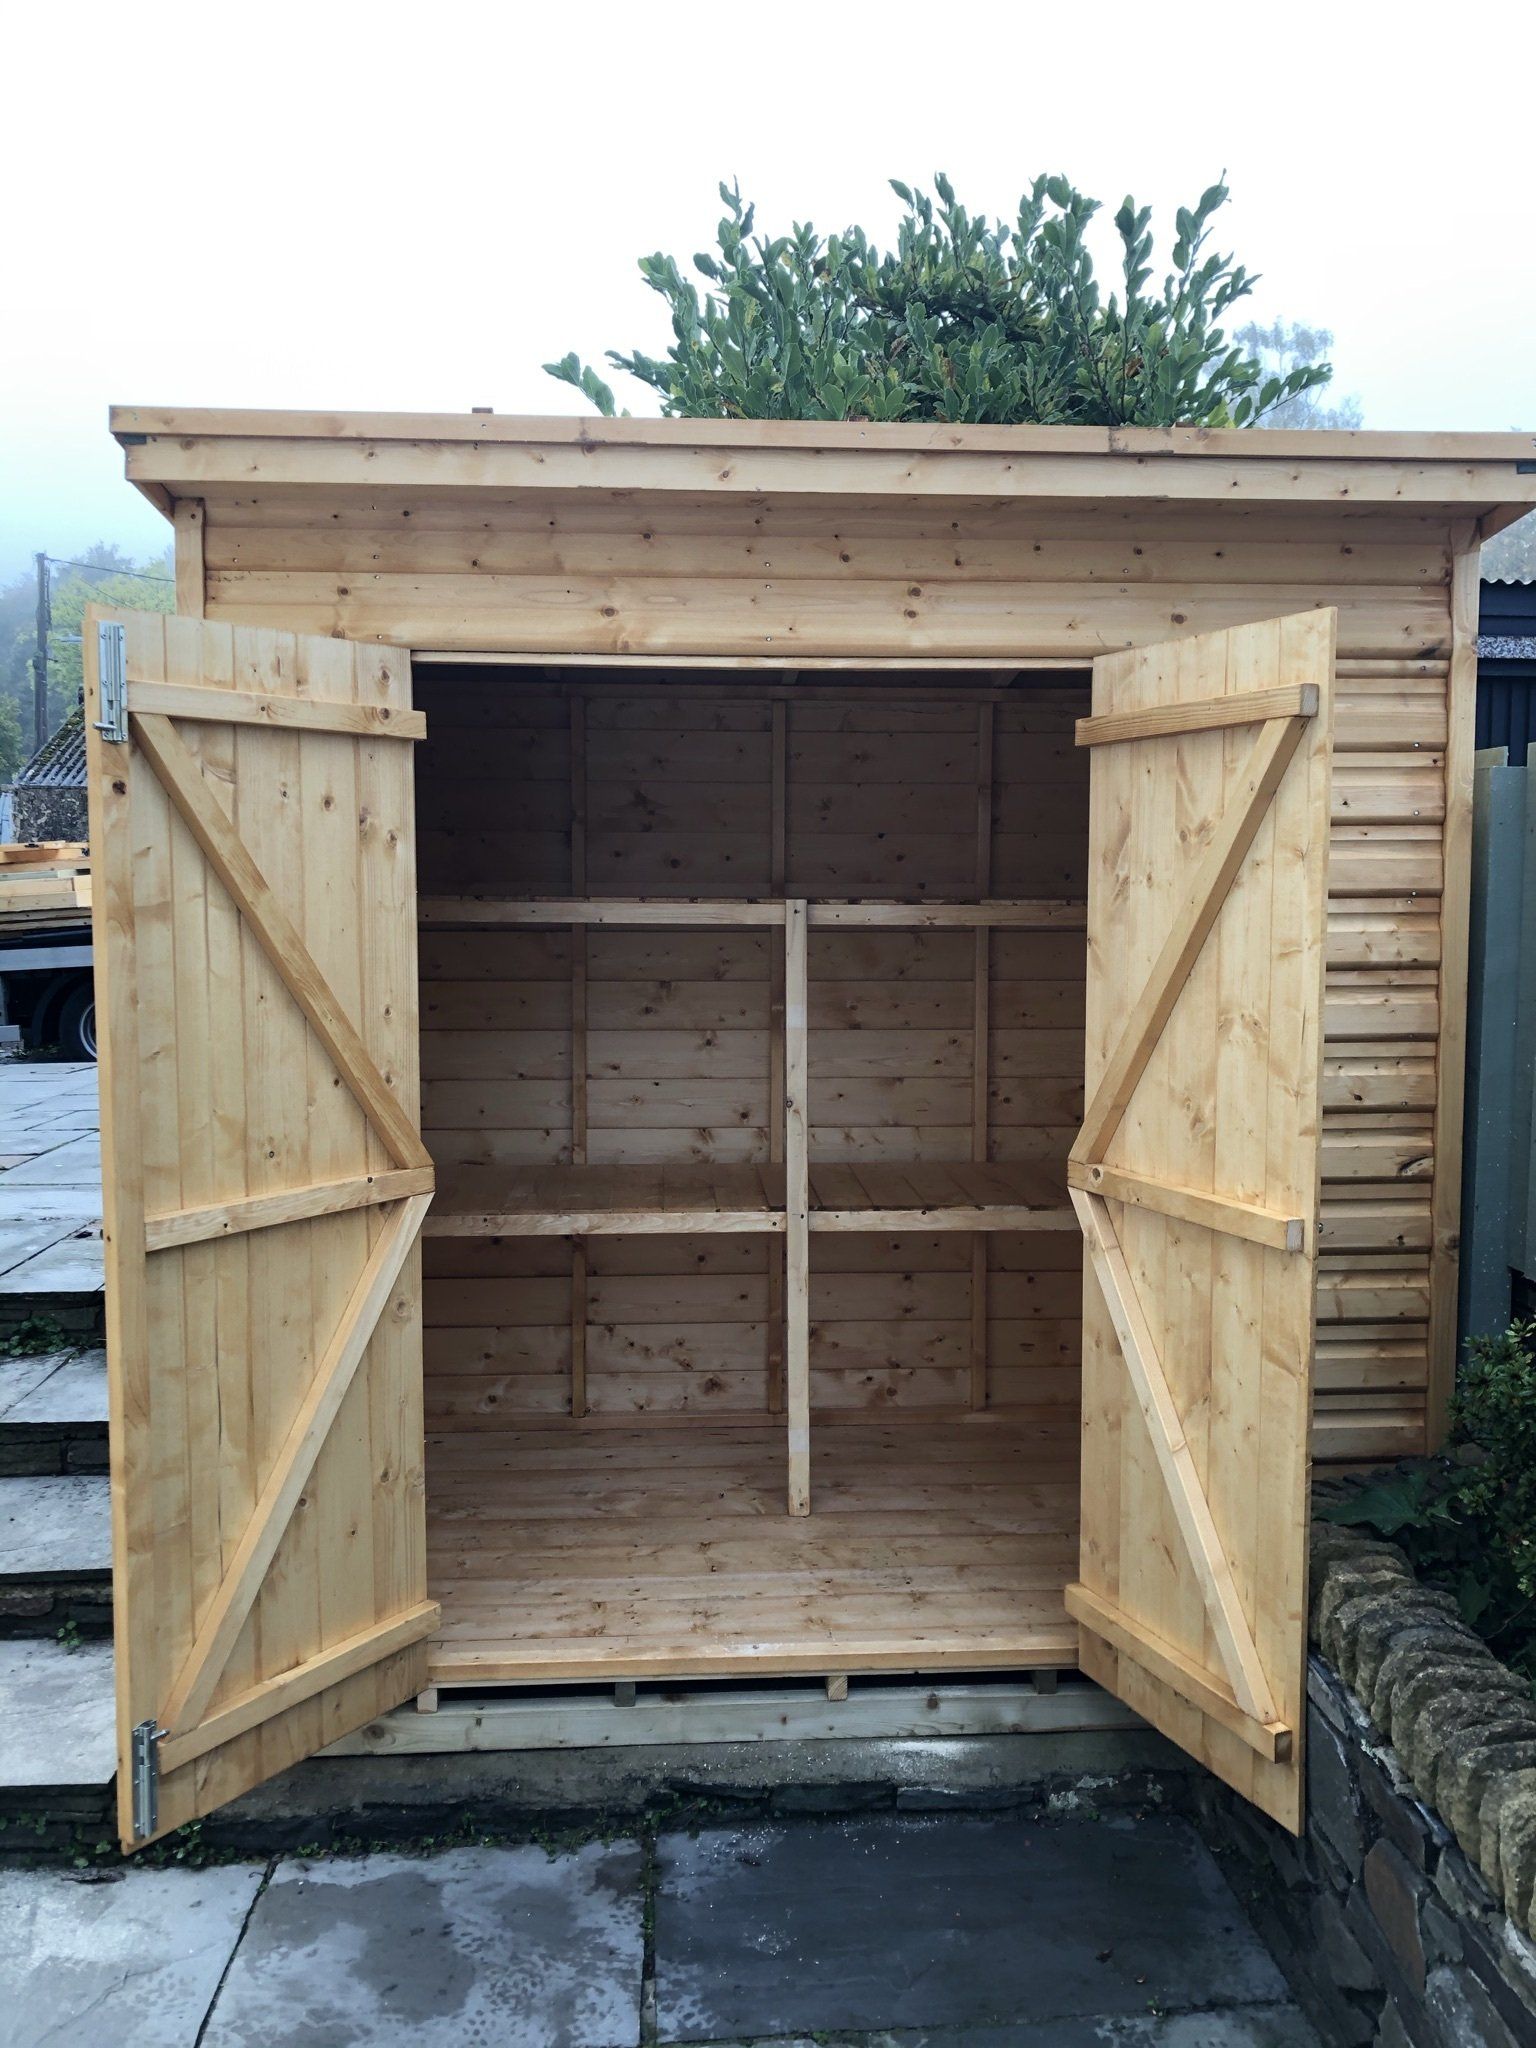 Shed height storage with double doors open to see the shelving set up.